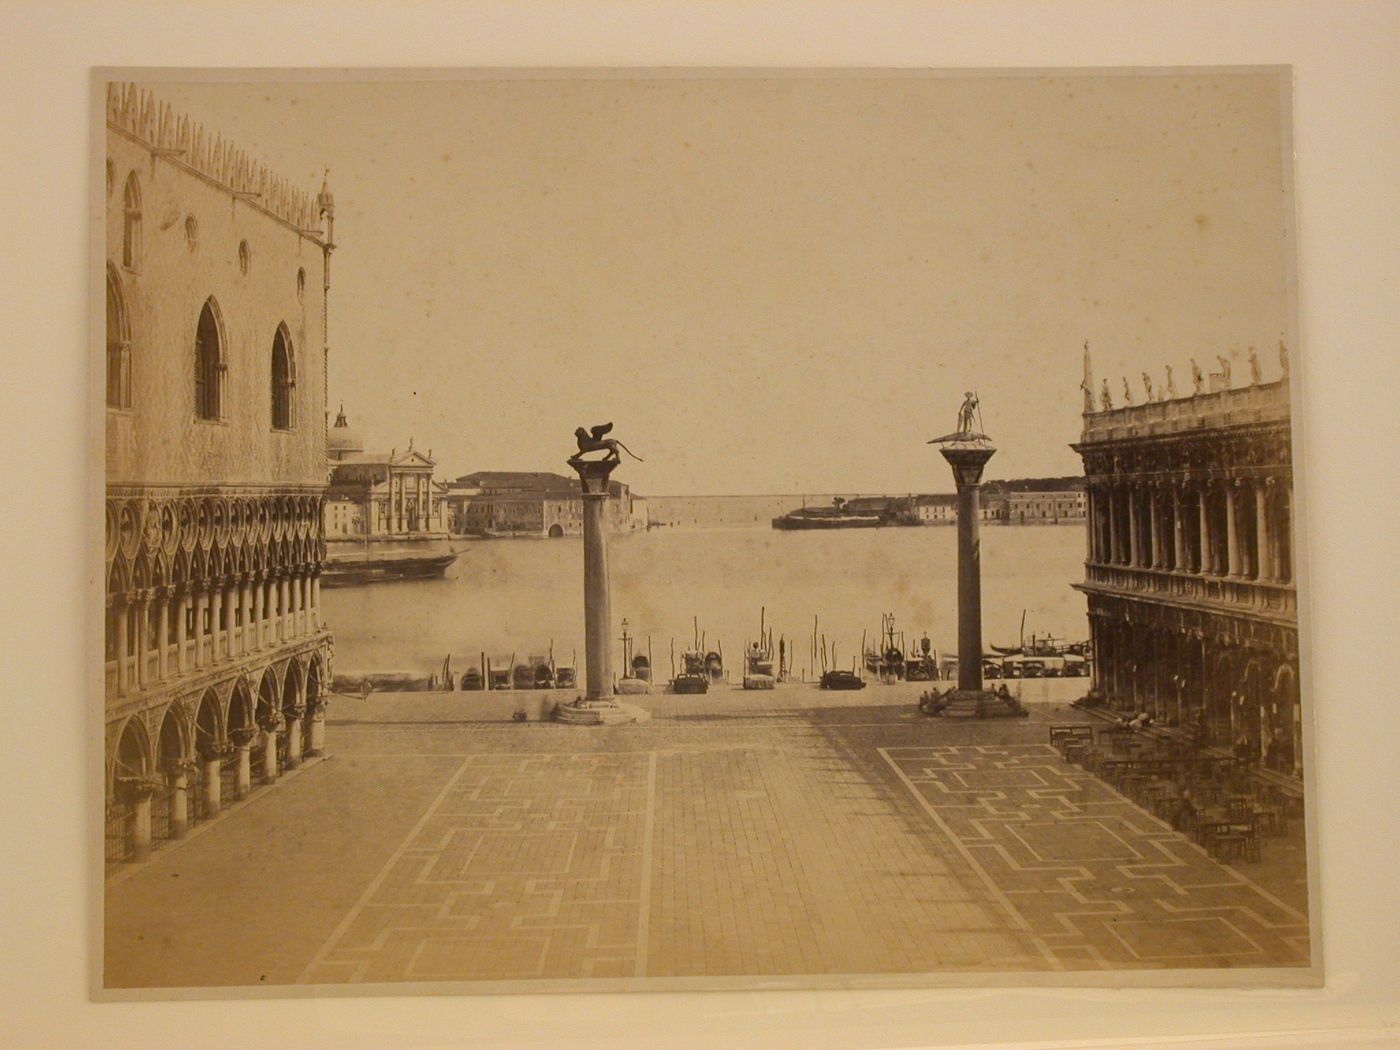 View from the Piazza San Marco looking towards the Grand Canal showing the Palazzo ducale, Biblioteca nazionale marciana, two columns with statues of the winged lion of Venice and St. Theodoro, and the Church of San Giorgio maggiore, Venice, Italy